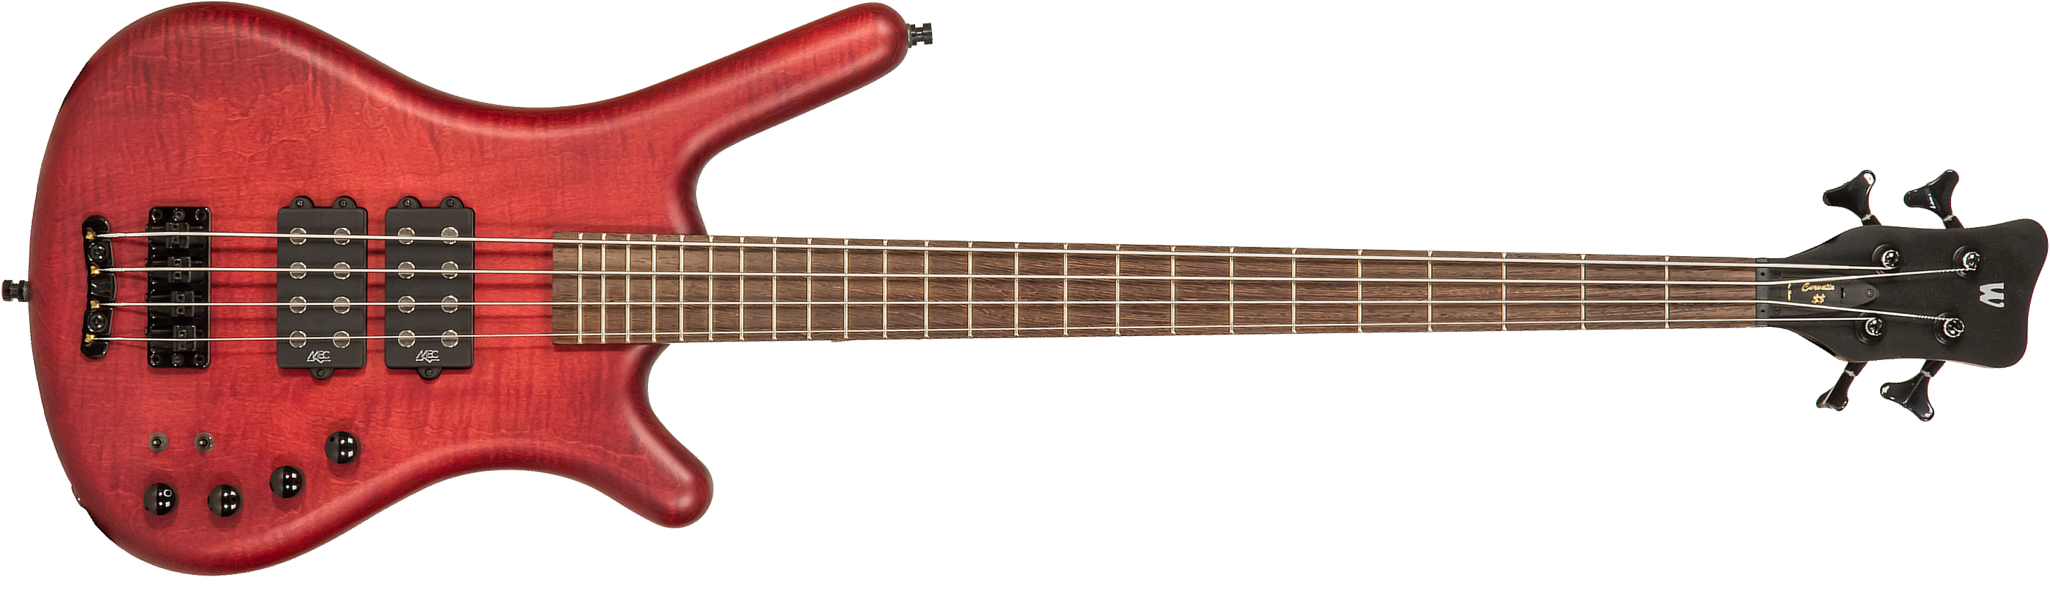 Warwick Corvette $$ 4c Pro Gps Maple Top Ltd All Active Wen - Burgundy Red Transparent Satin - Solid body electric bass - Main picture